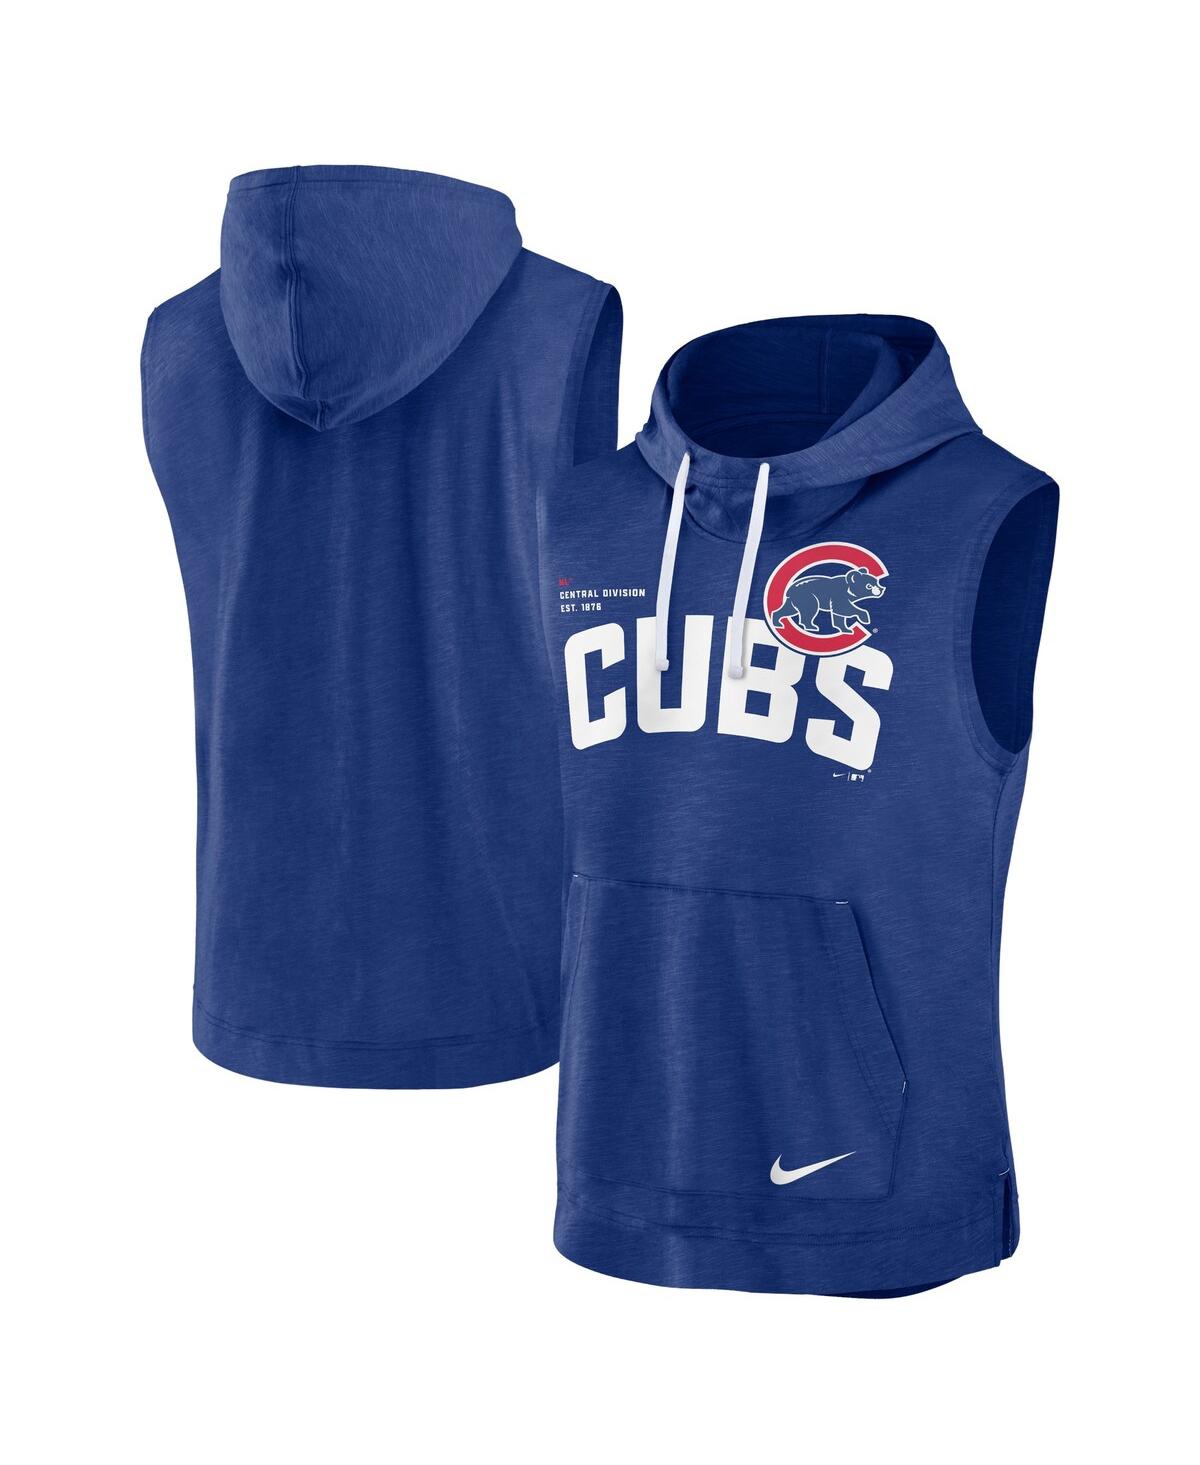 Shop Nike Men's  Royal Chicago Cubs Athletic Sleeveless Hooded T-shirt